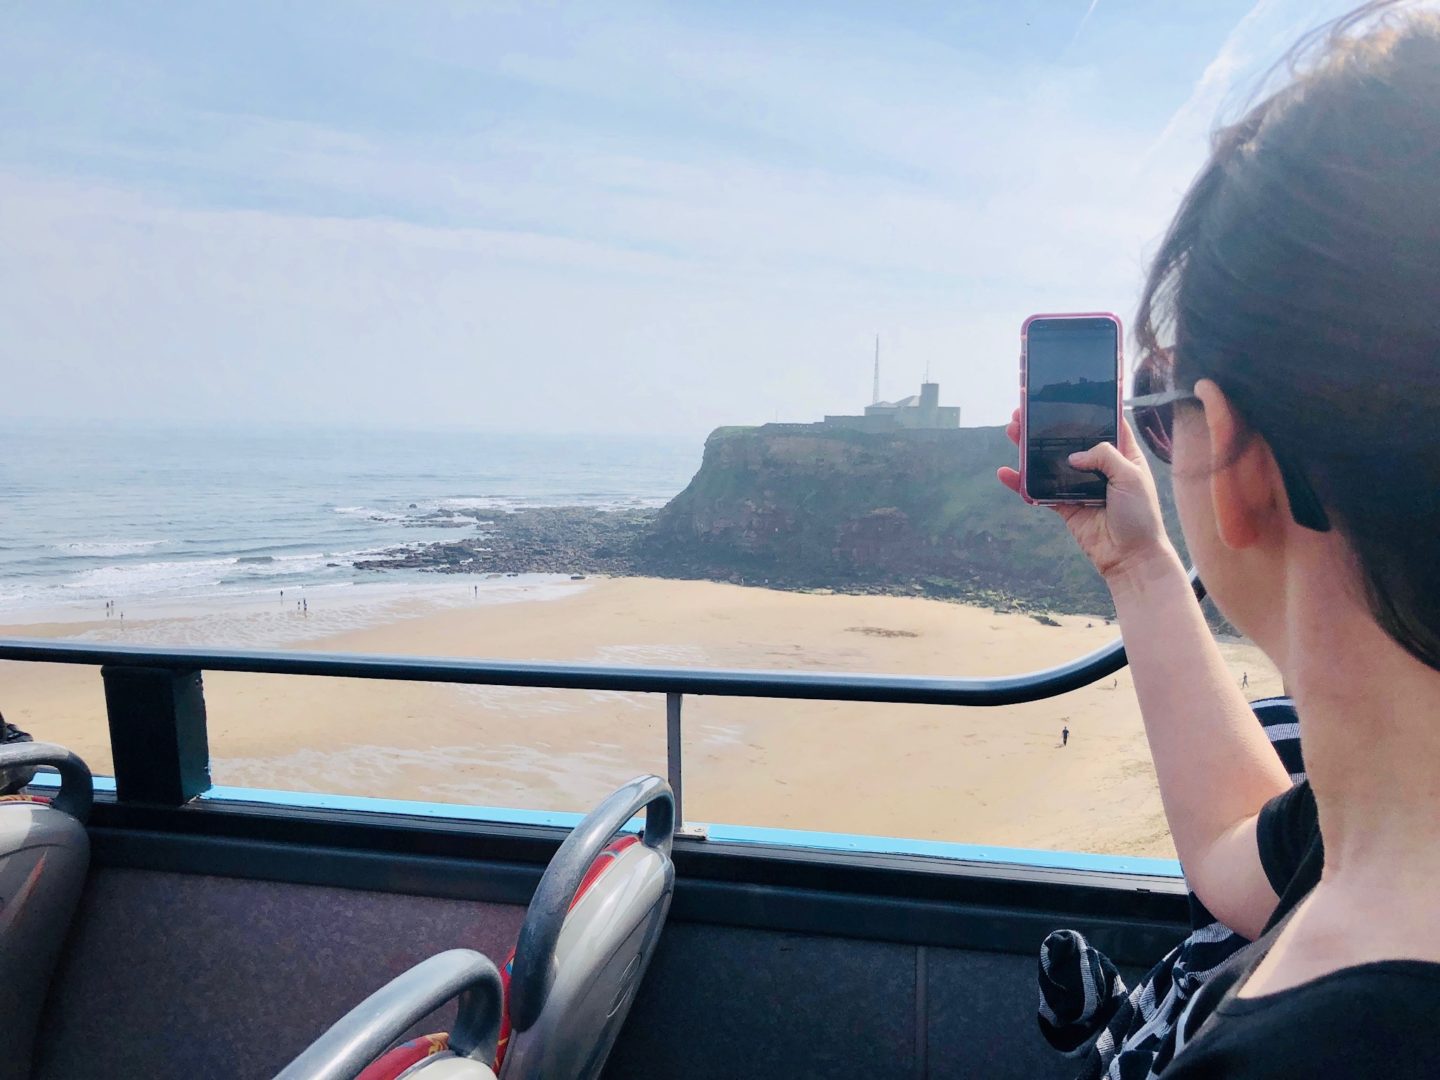 AD: A day out at Whitley Bay with Stagecoach's the Seasider open top bus service